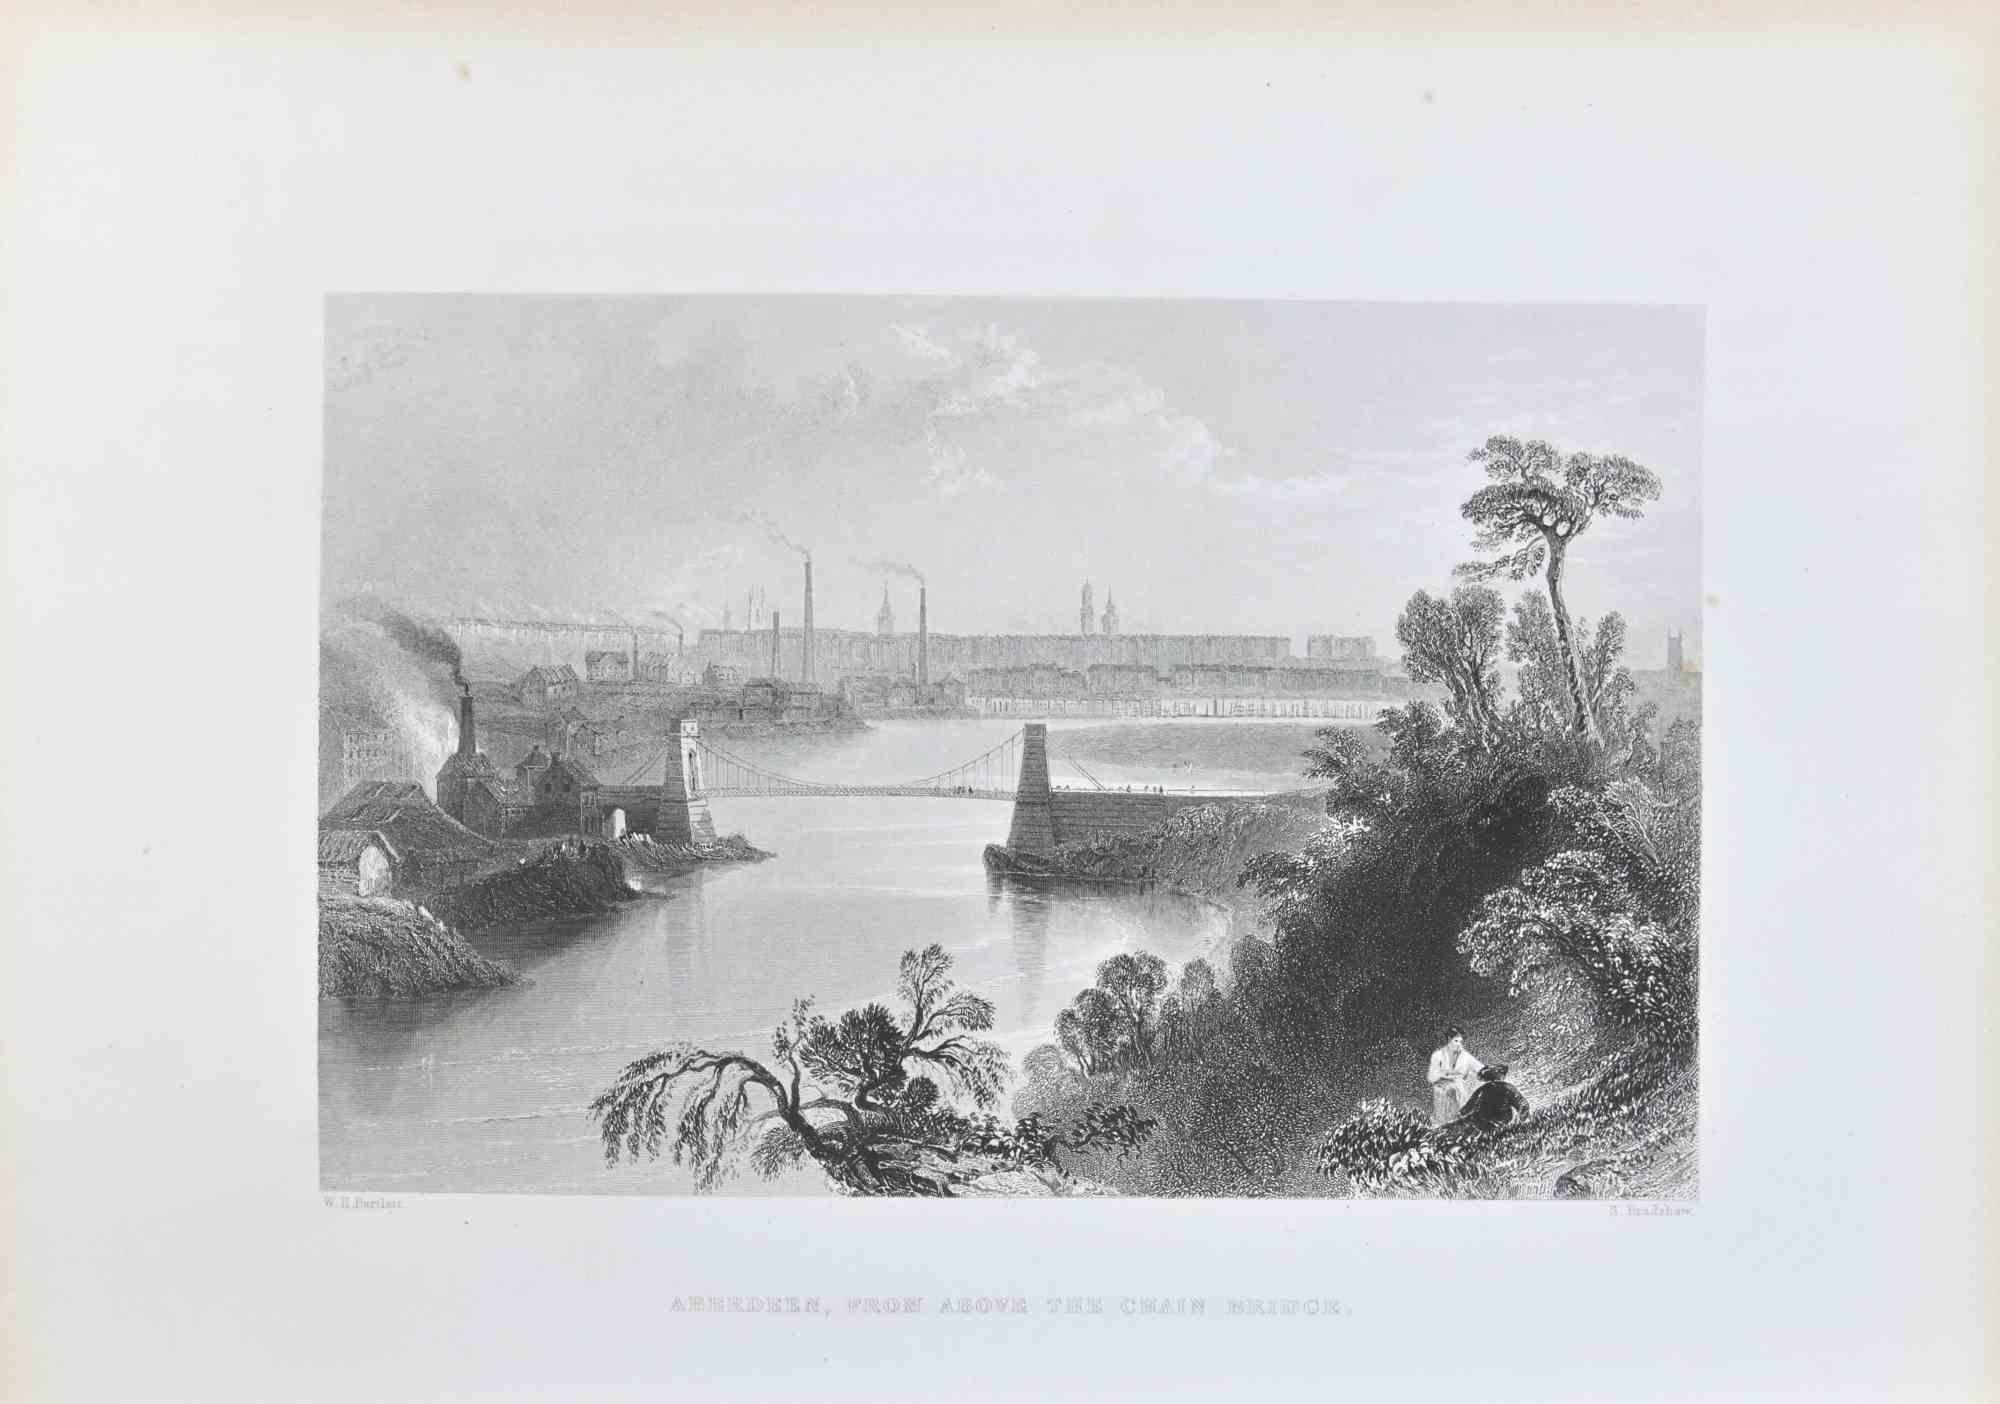 Aberdeen is an Etching on paper realized by S. Bradshaw in 1838.

The artwork is in good condition.

The artwork is depicted in a well-balanced composition.
